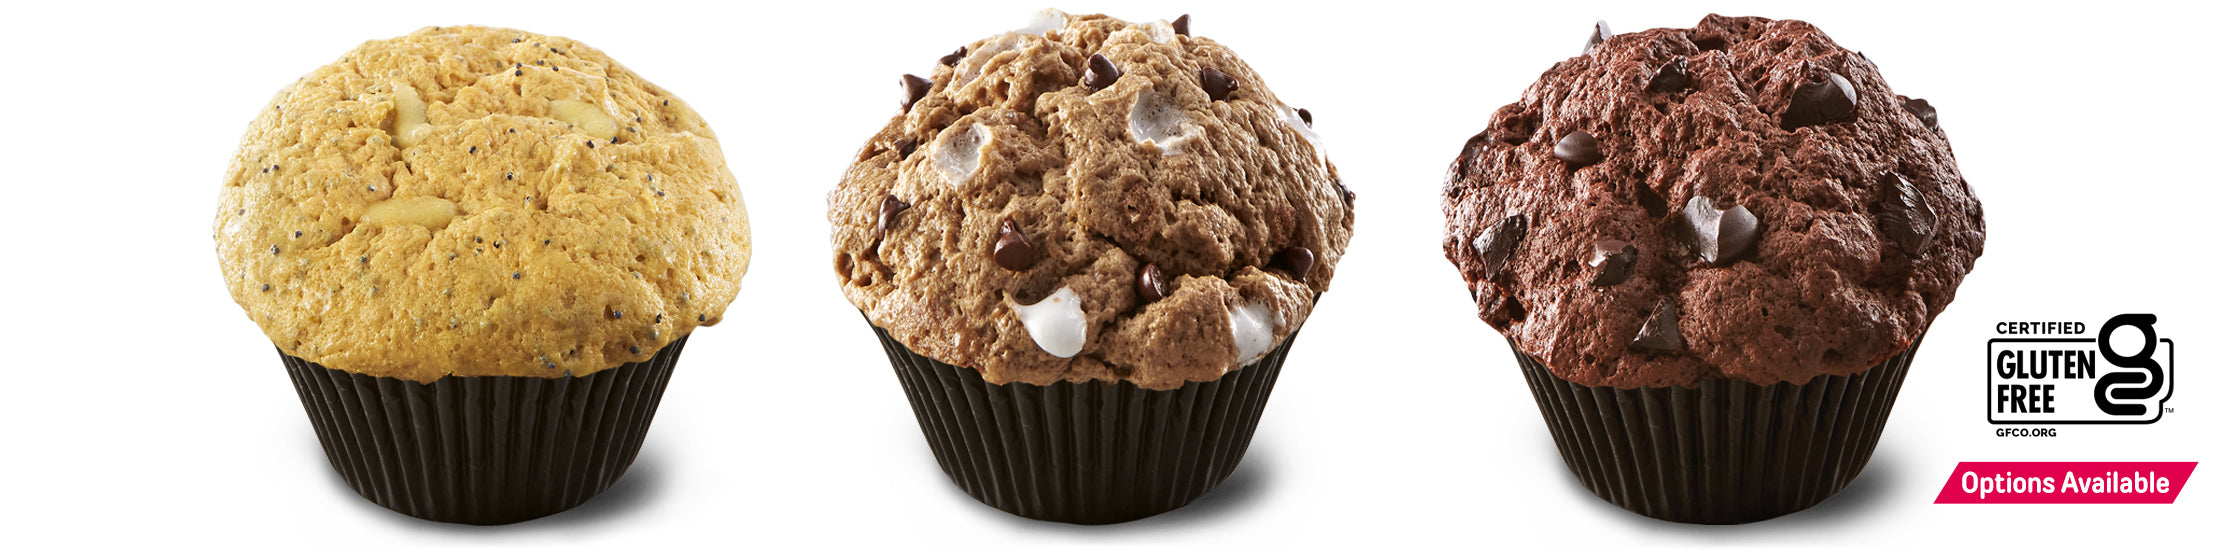 FlapJacked Mighty Muffin® with Certified Gluten-Free Options Available